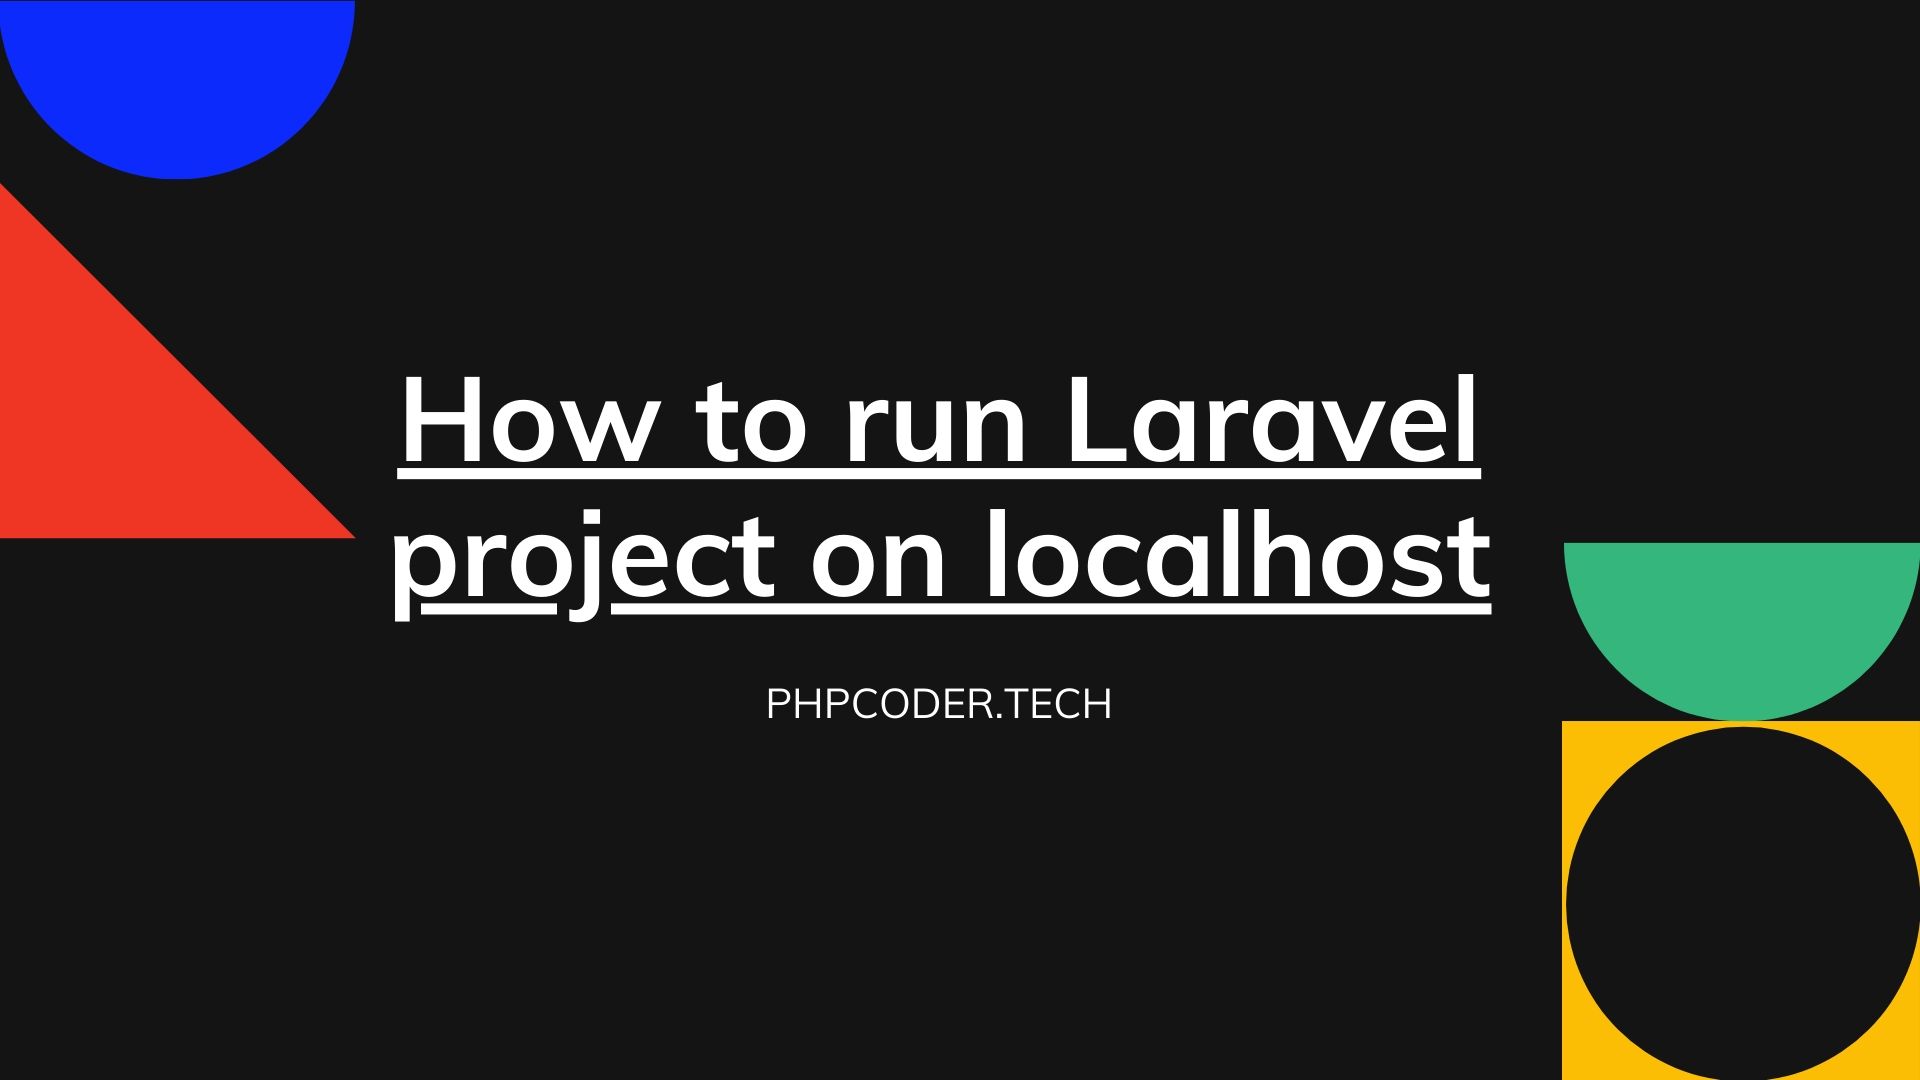 How to run Laravel project on localhost